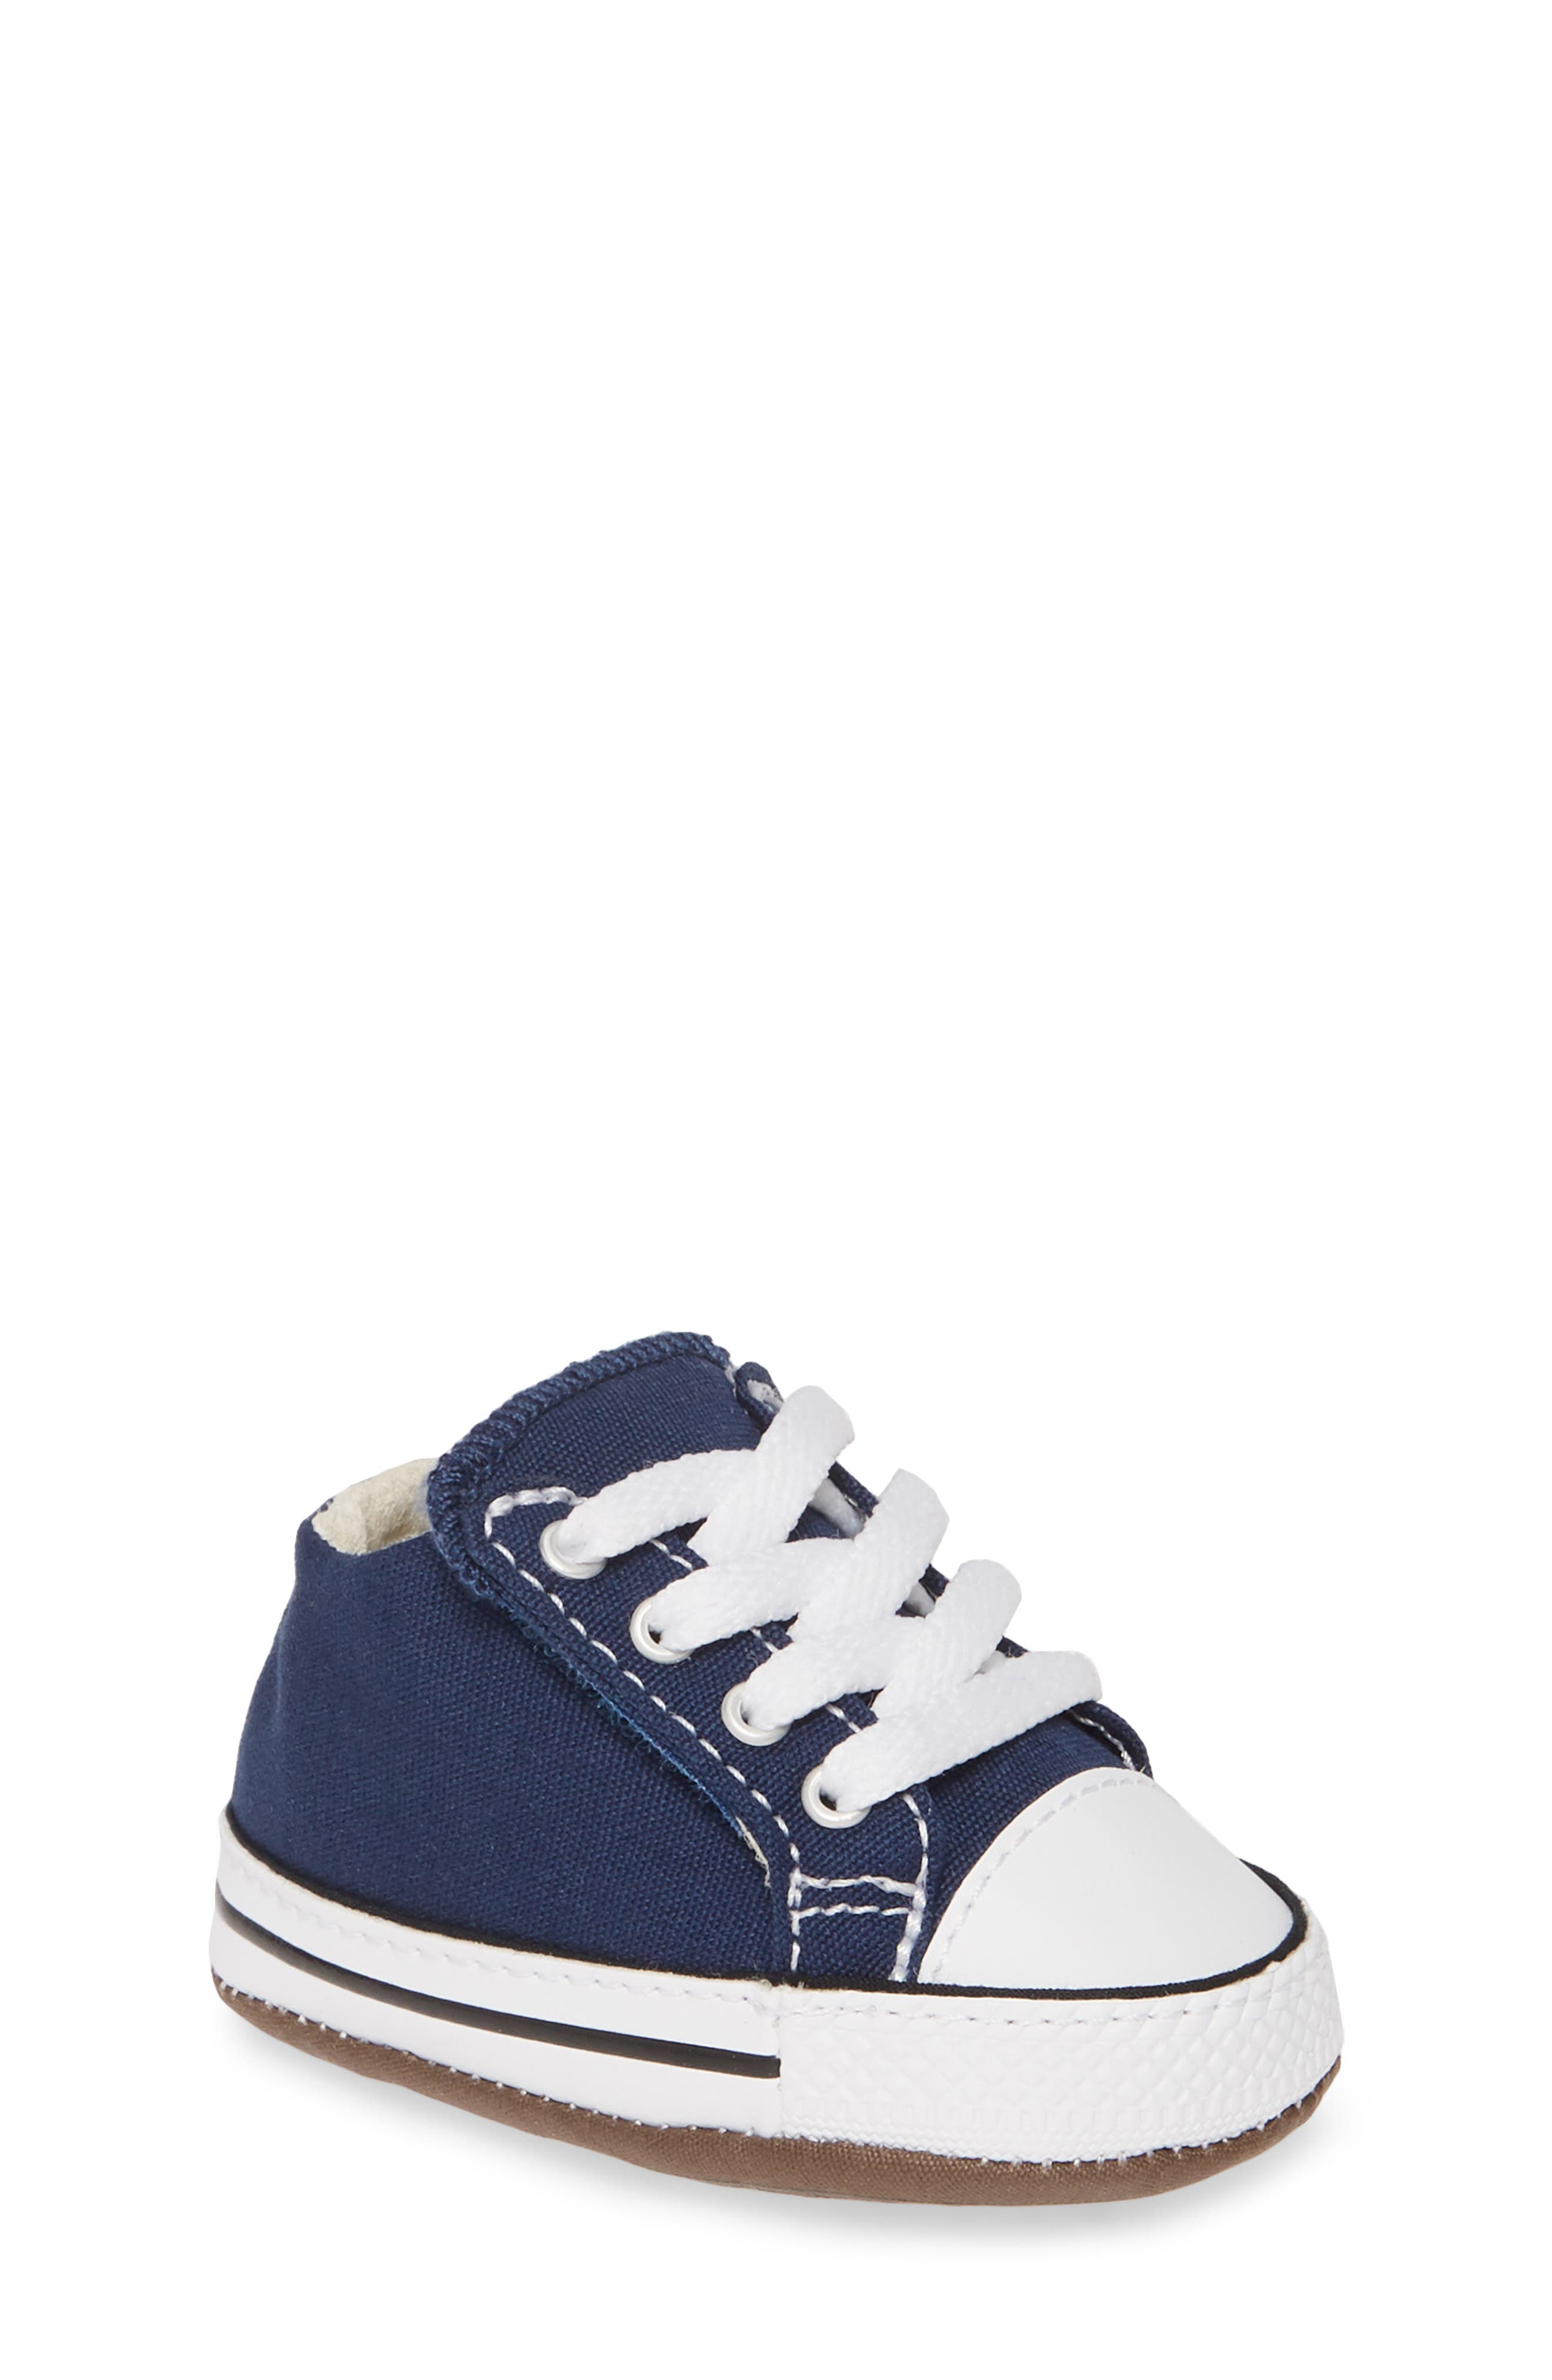 All Star® Cribster Low Top Crib Shoe 